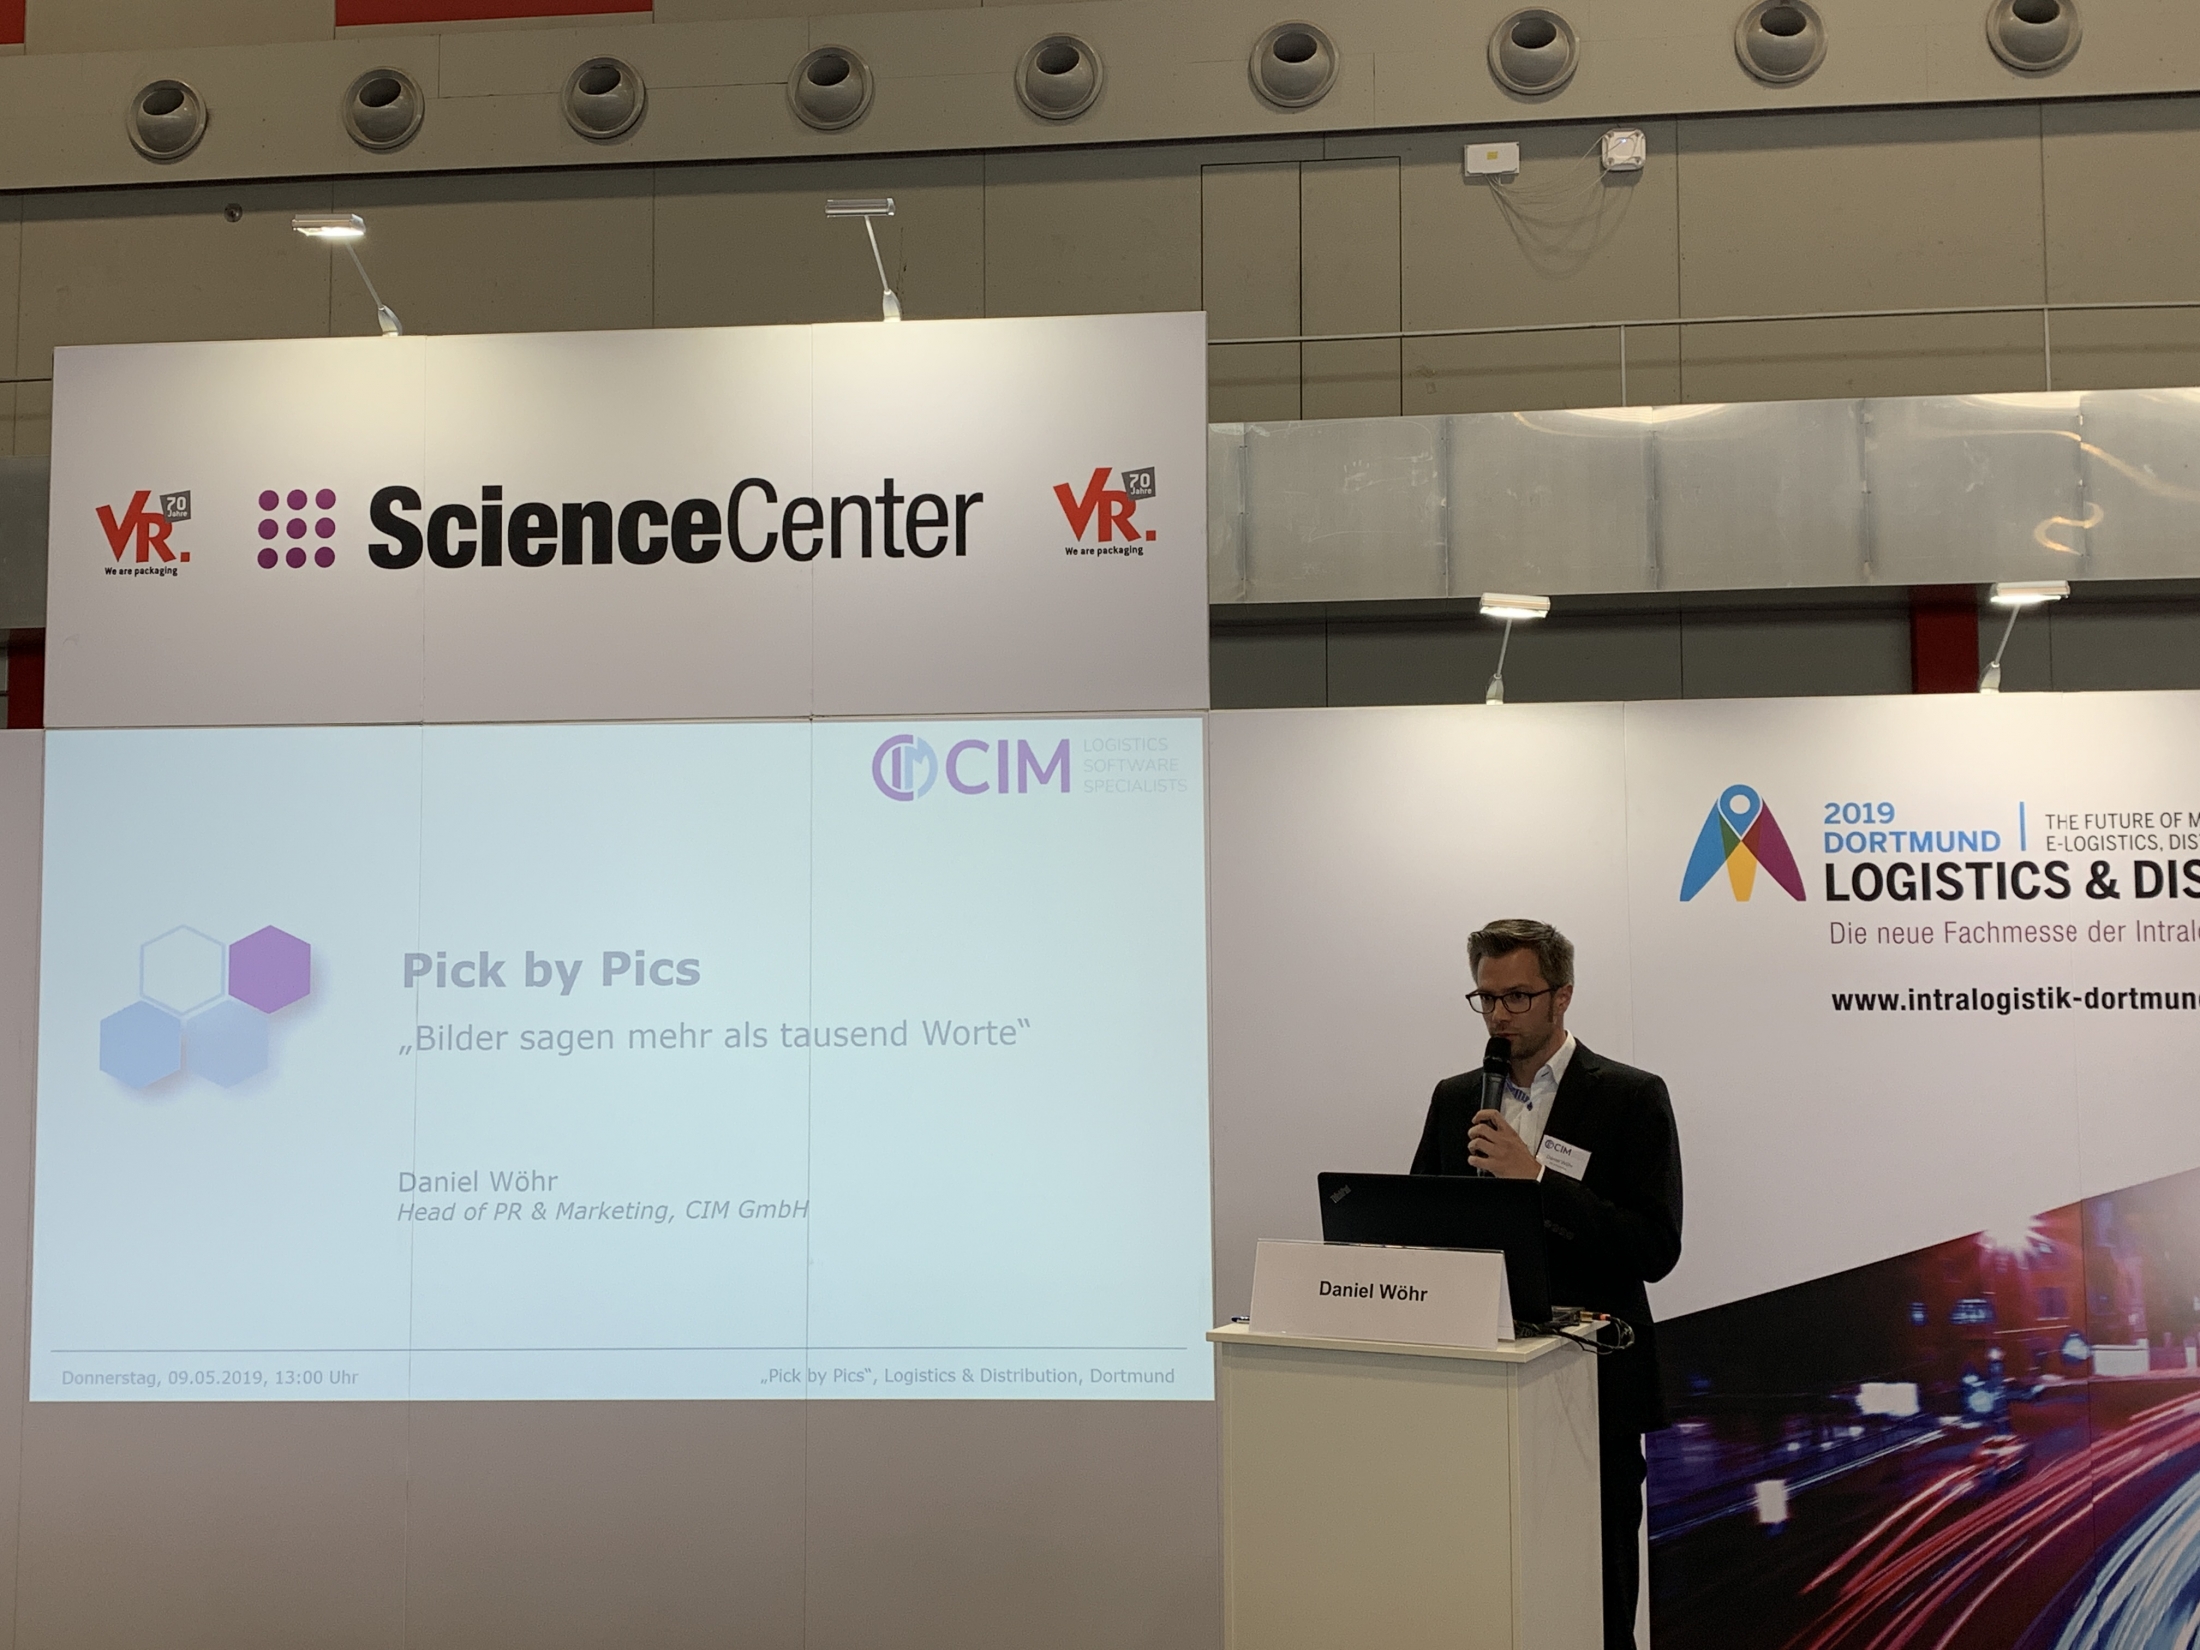 CIM presented “pick-by-pics”, the mobile process guidance solution based solely on pictures.